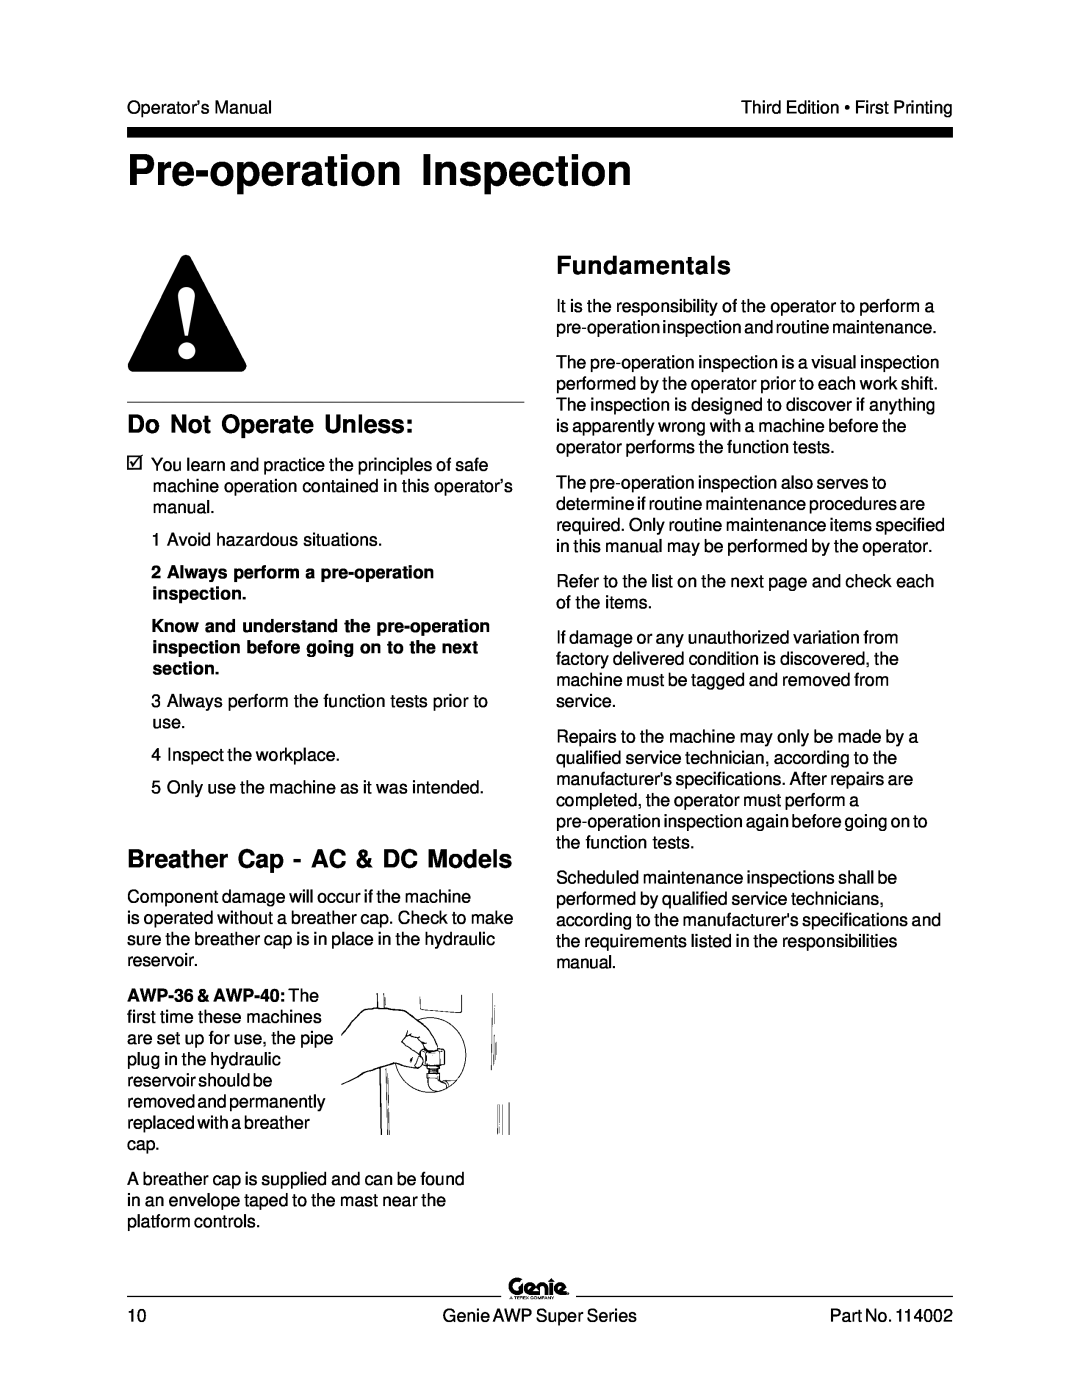 Genie 114002 manual Pre-operation Inspection, Breather Cap - AC & DC Models, Fundamentals, Do Not Operate Unless 